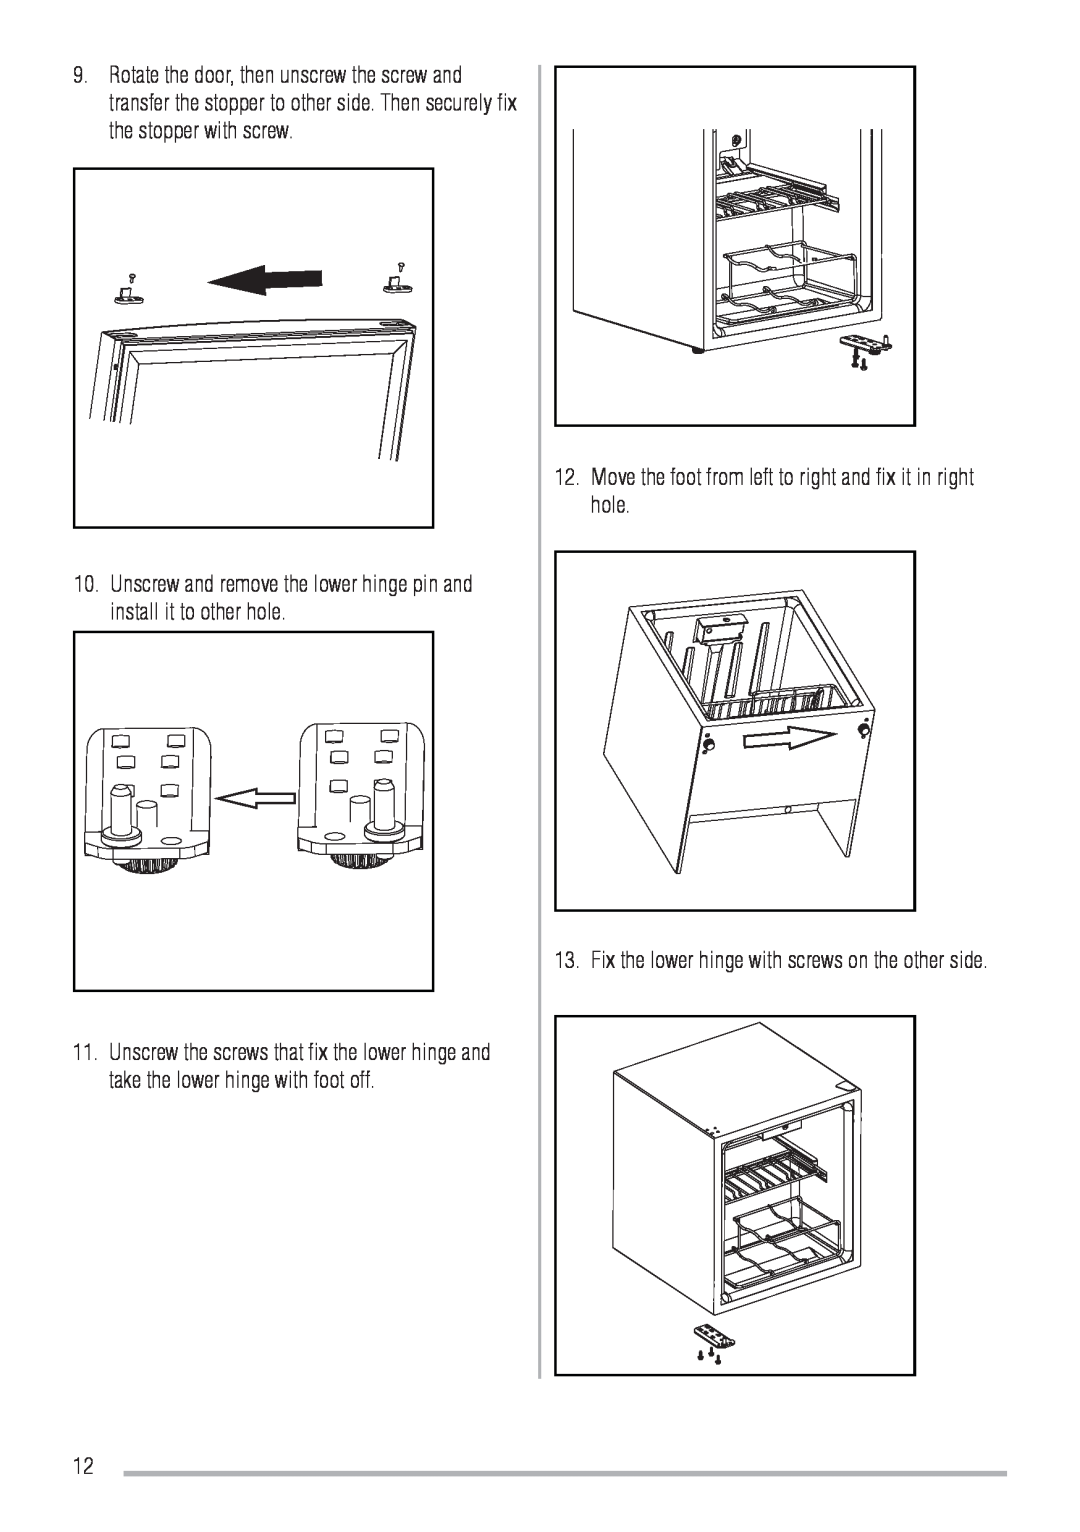 Zanussi ZRW106N user manual Move the foot from left to right and fix it in right hole 